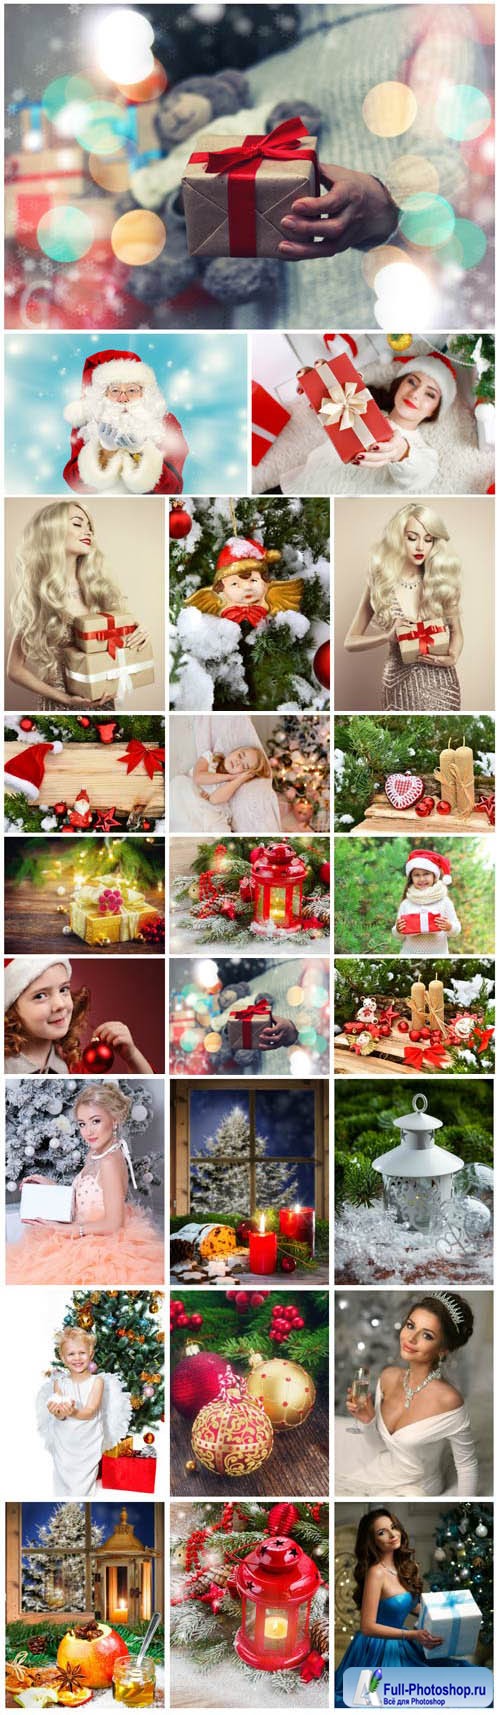 New Year and Christmas stock photos 76